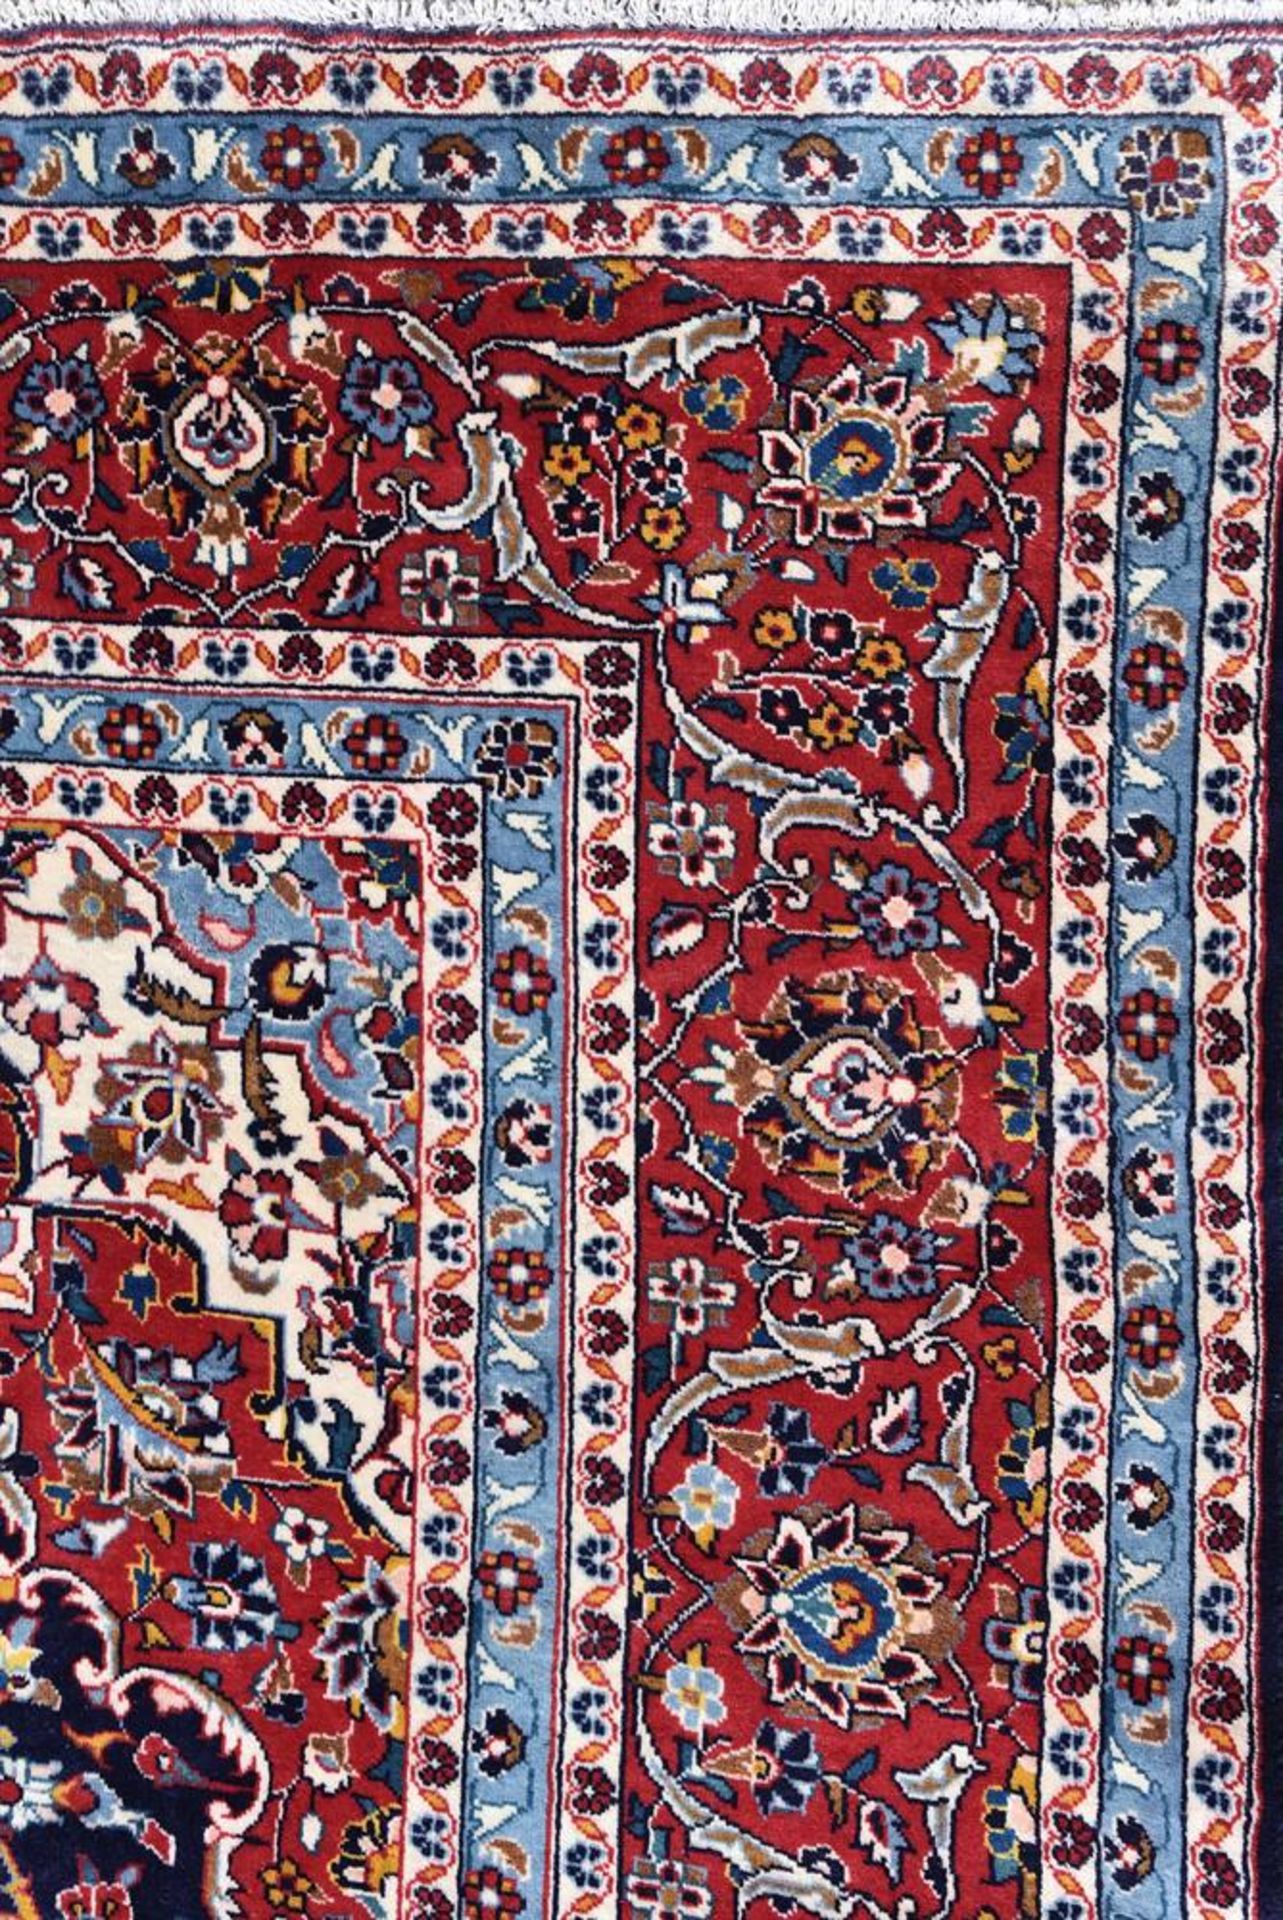 A KASHAN CARPET, approximately 410 x 290cm - Image 3 of 3